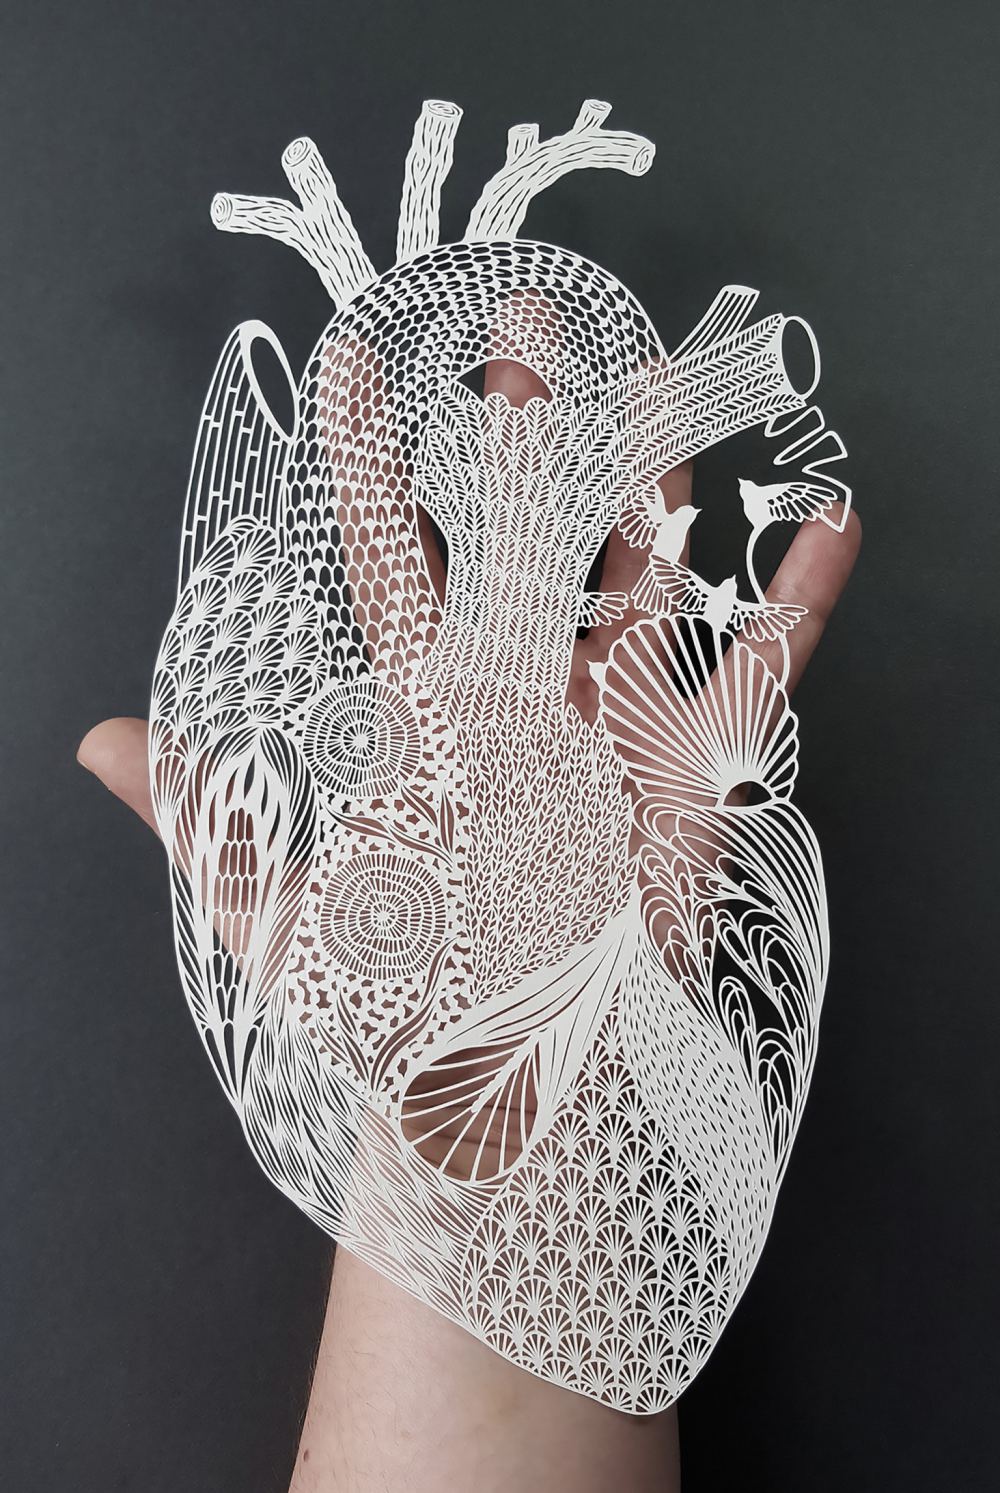 Delightful And Intricate Paper Cuttings By Pippa Dyrlaga 1